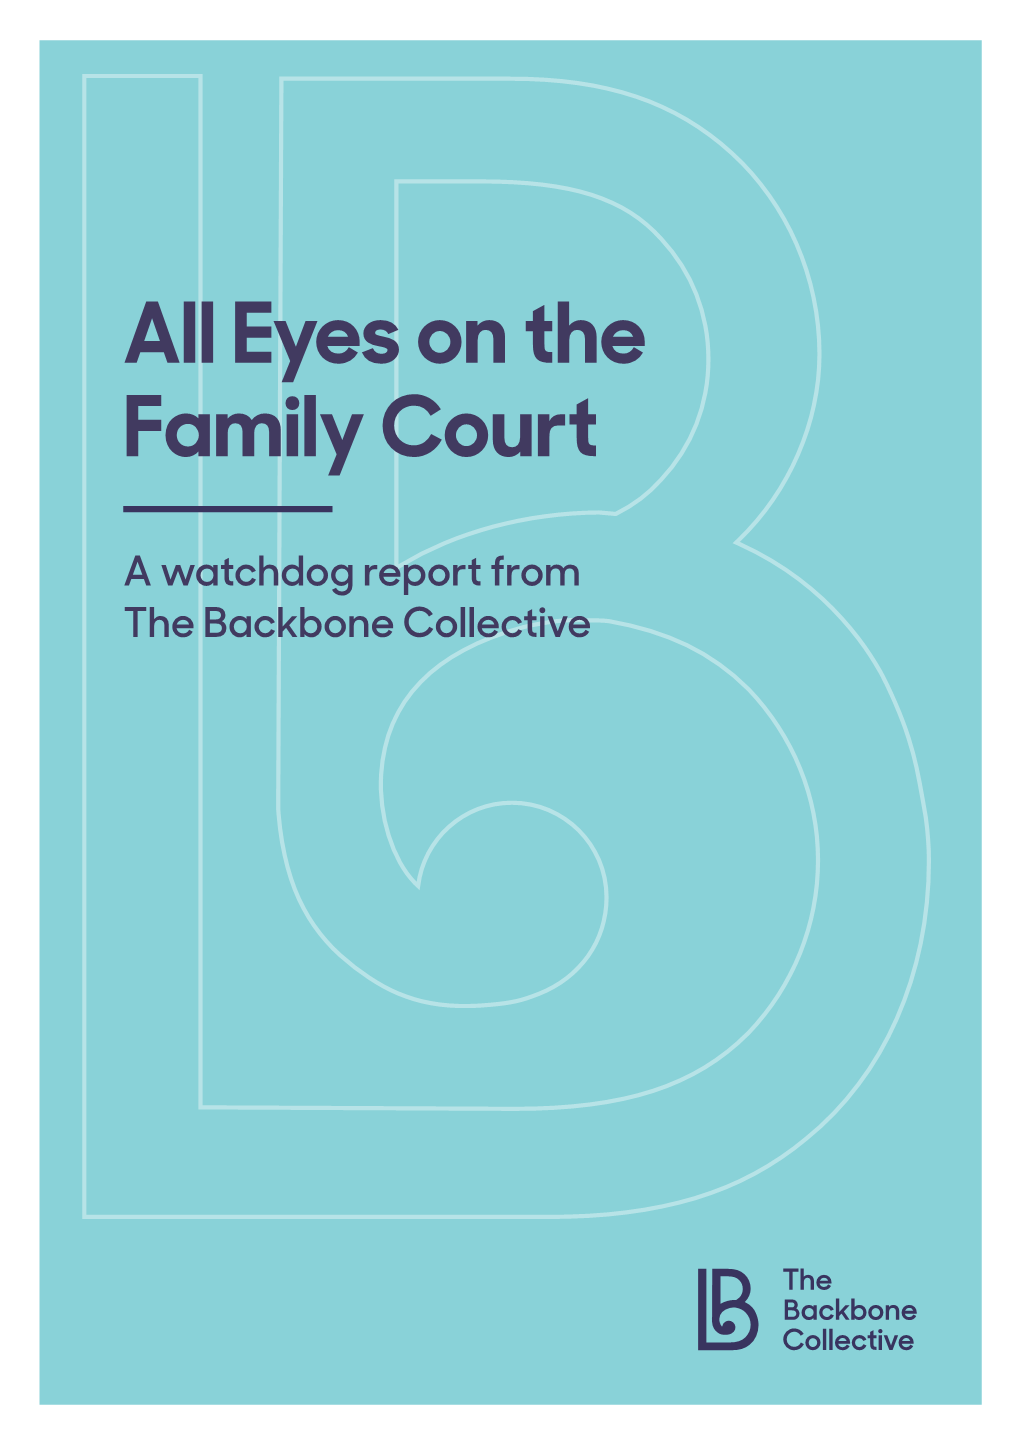 All Eyes on the Family Court